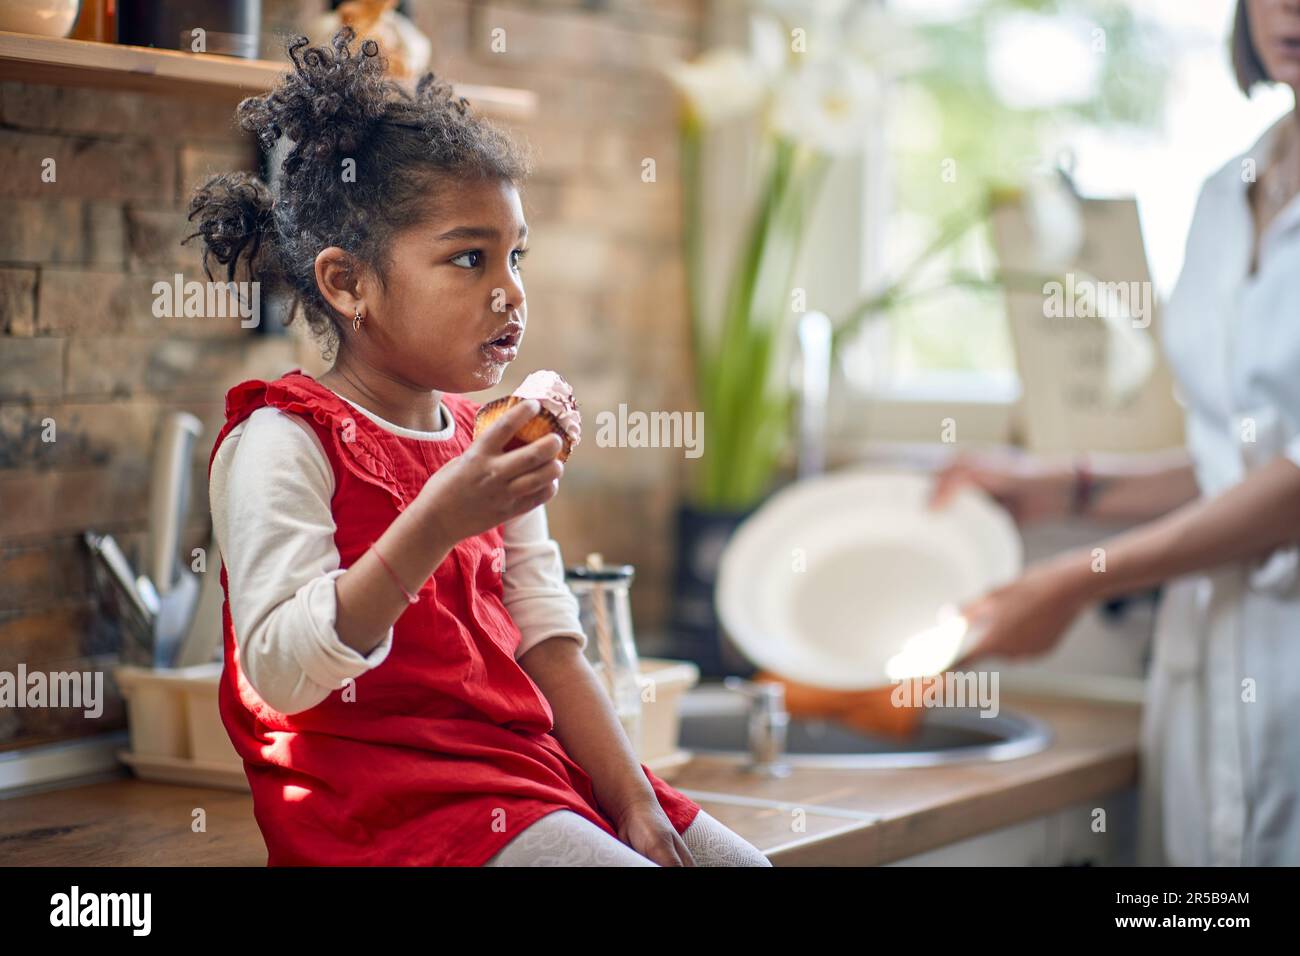 Toddler girl sits in the kitchen, delighting in a mouthwatering muffin, while her mother stands beside her, diligently washing dishes. Stock Photo